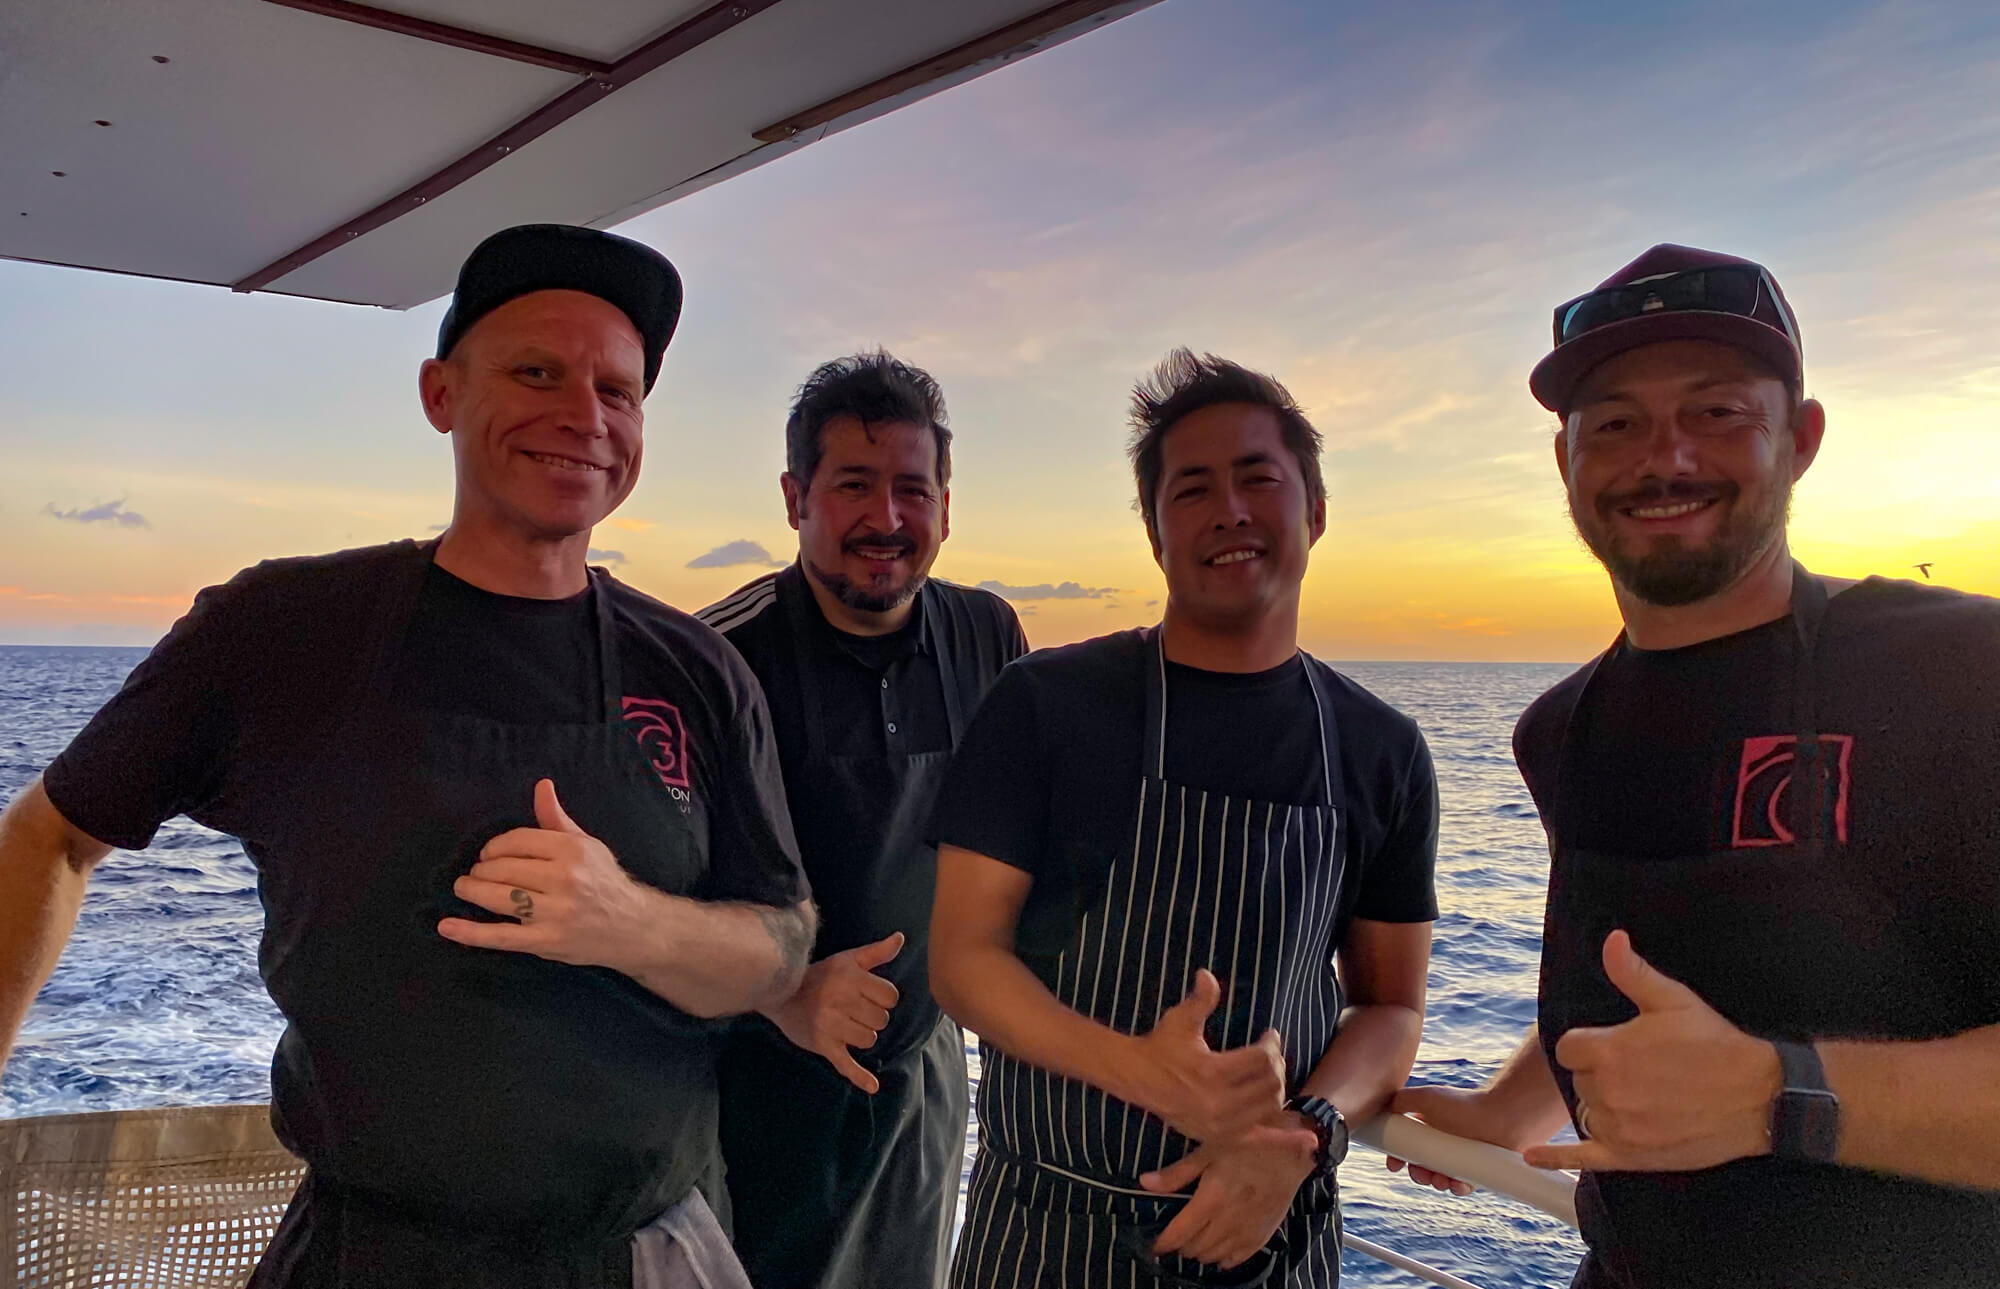 Four chefs on a boat giving thumbs up.